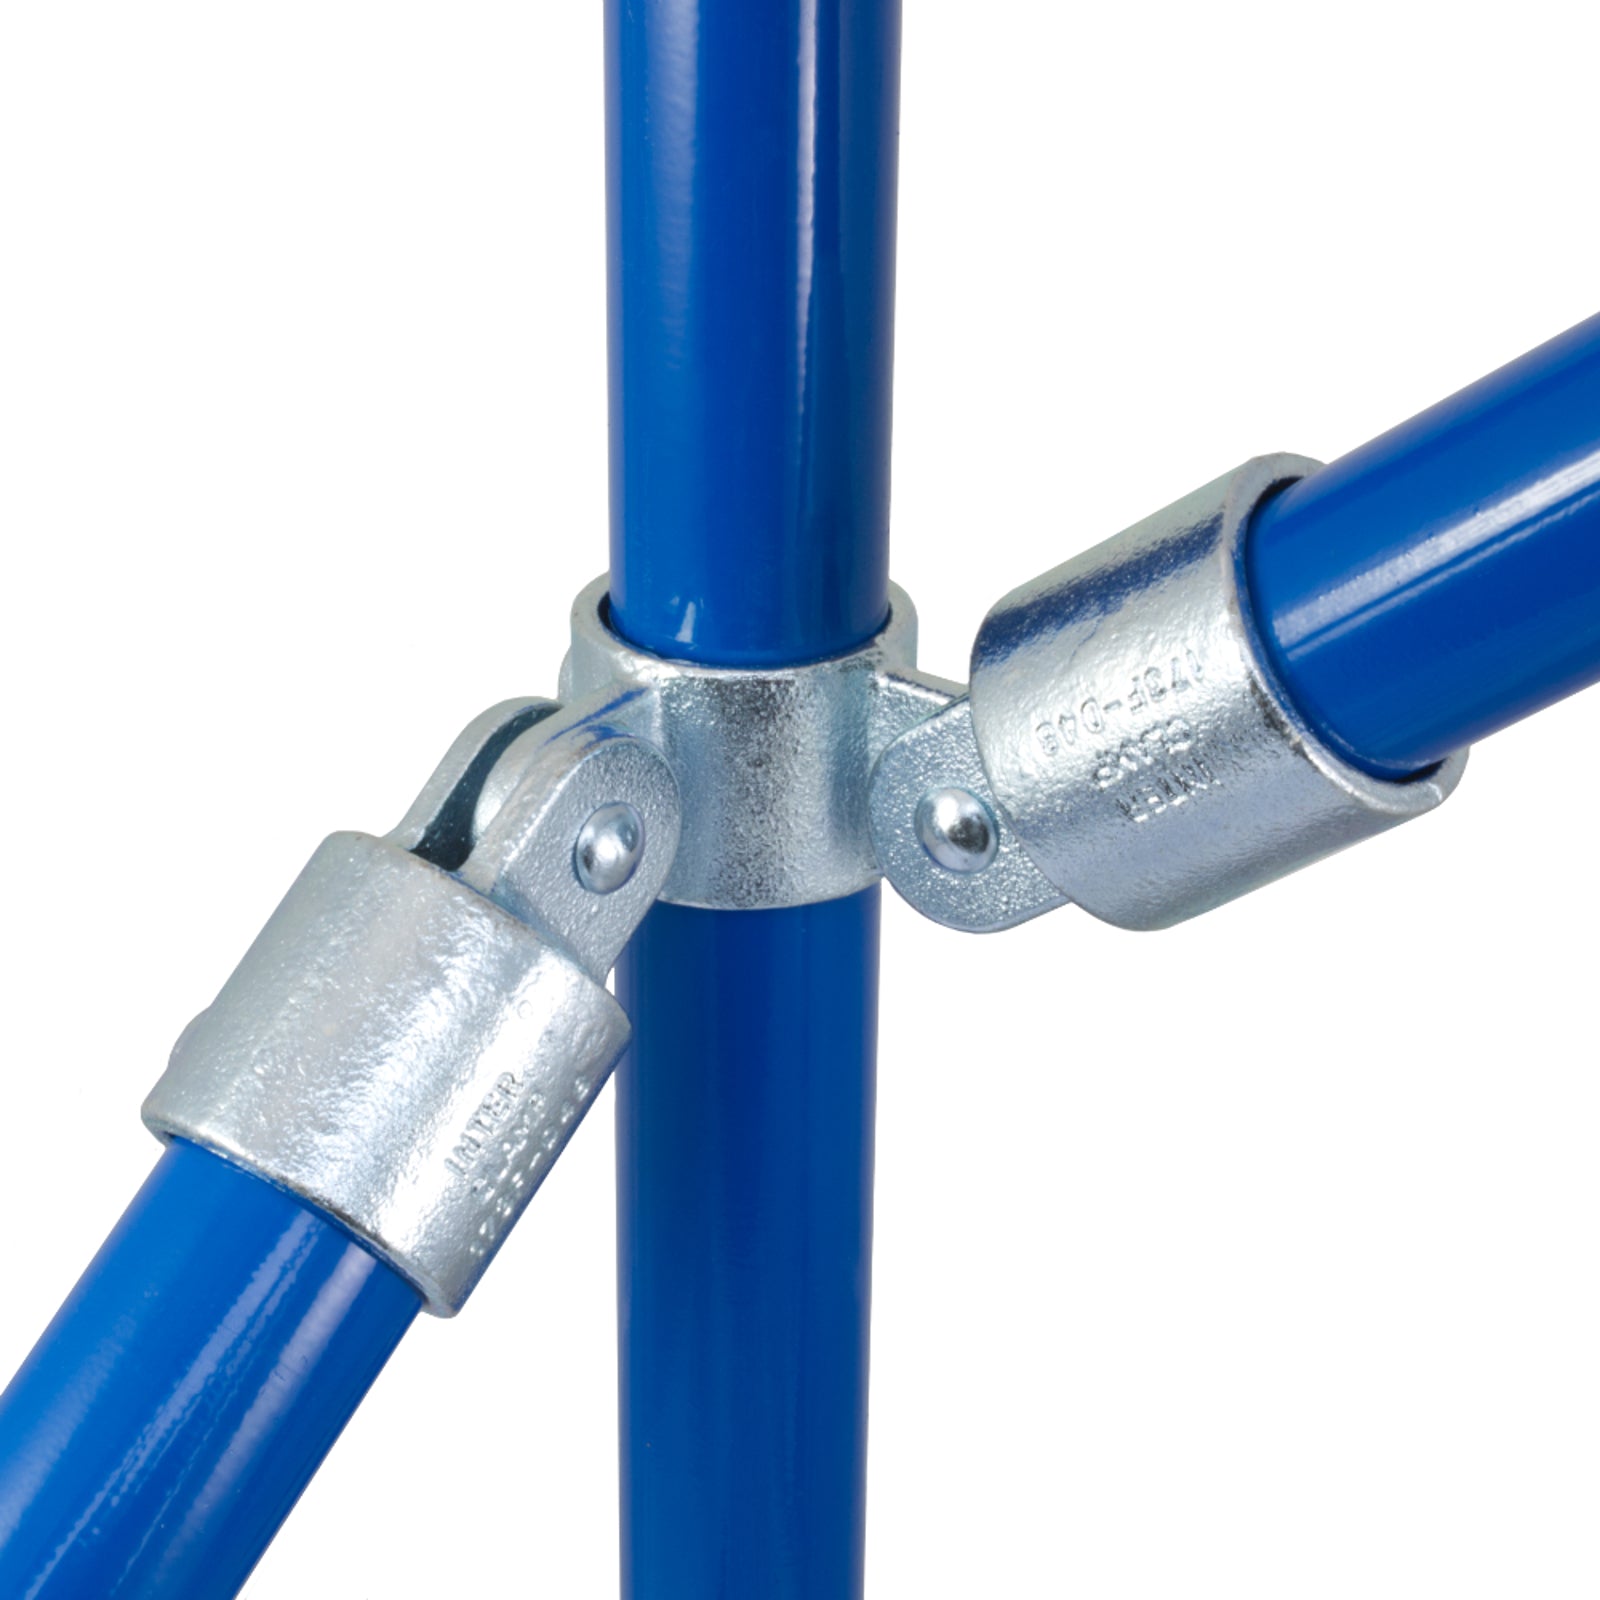 Corner Swivel Combination, Interclamp Code 168. Shop rail, pipe and fence fittings online chain.com.au. Australia wide shipping.